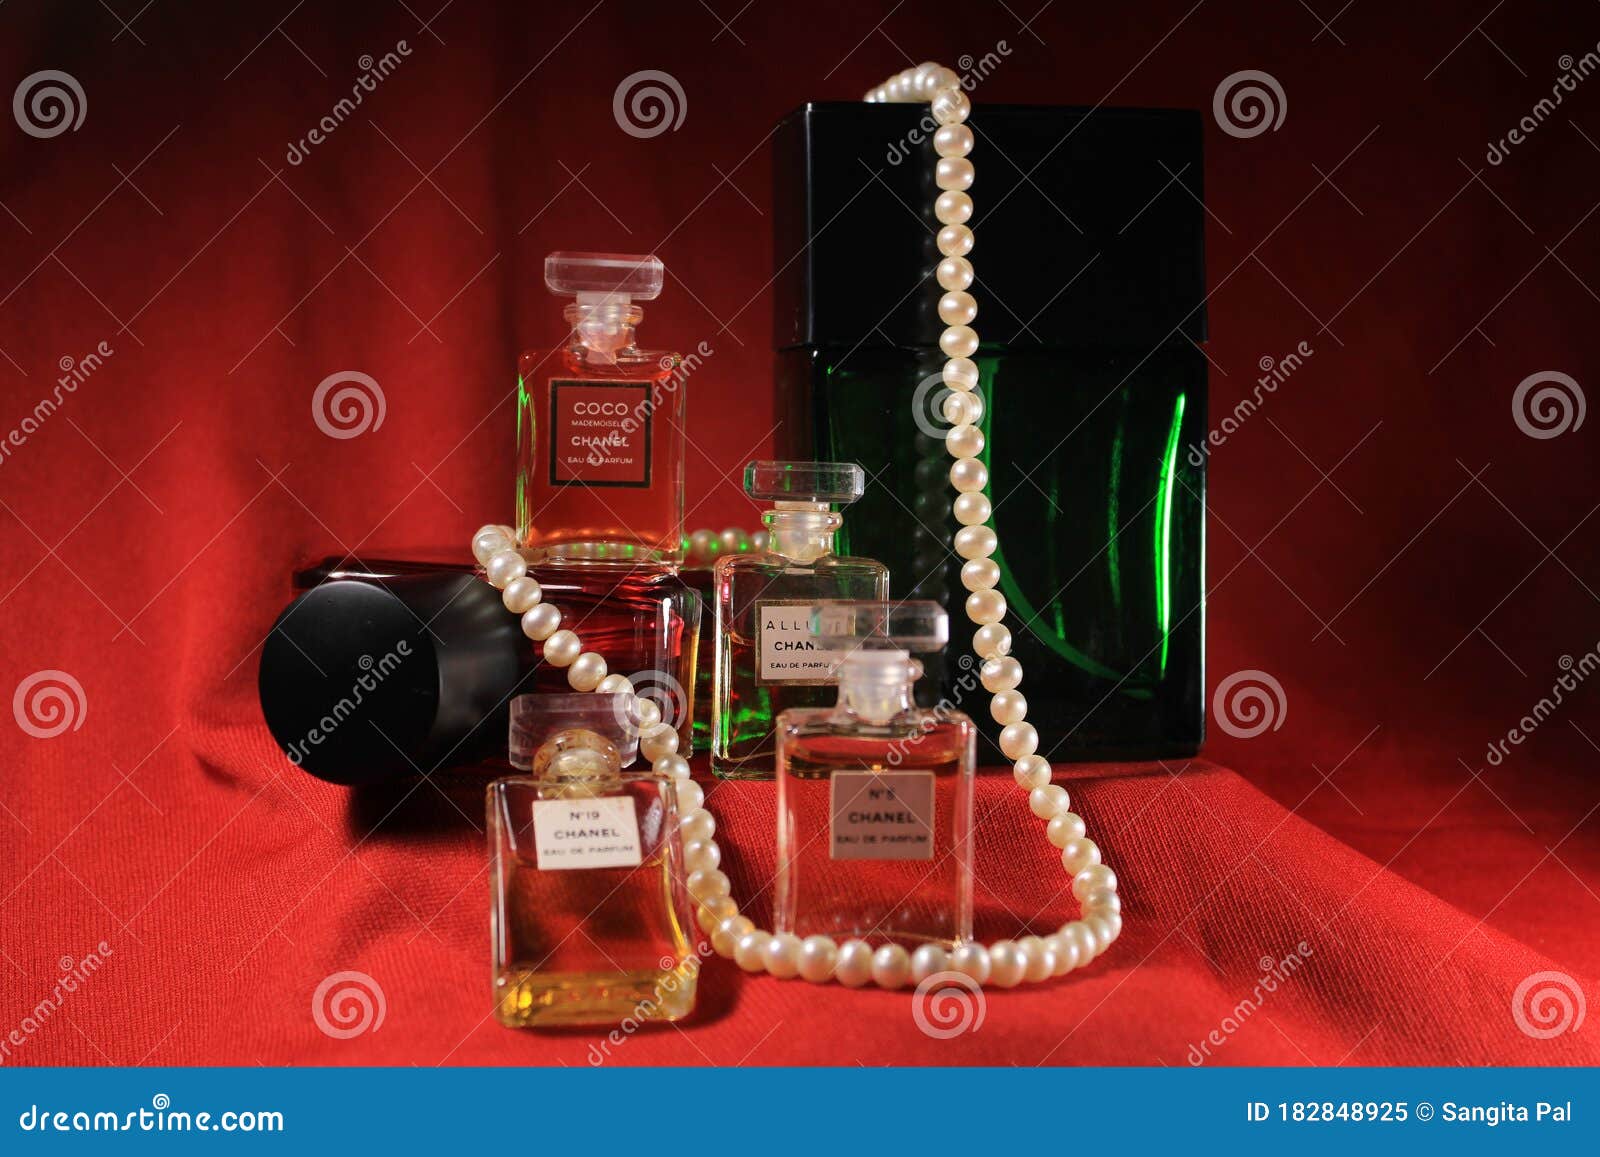 Chanel Perfume Bottles Isolated on Red Background. Bottle with Coco Chanel  & N`5 Chanel Perfume Product. Editorial Image - Image of fashion,  container: 182848925